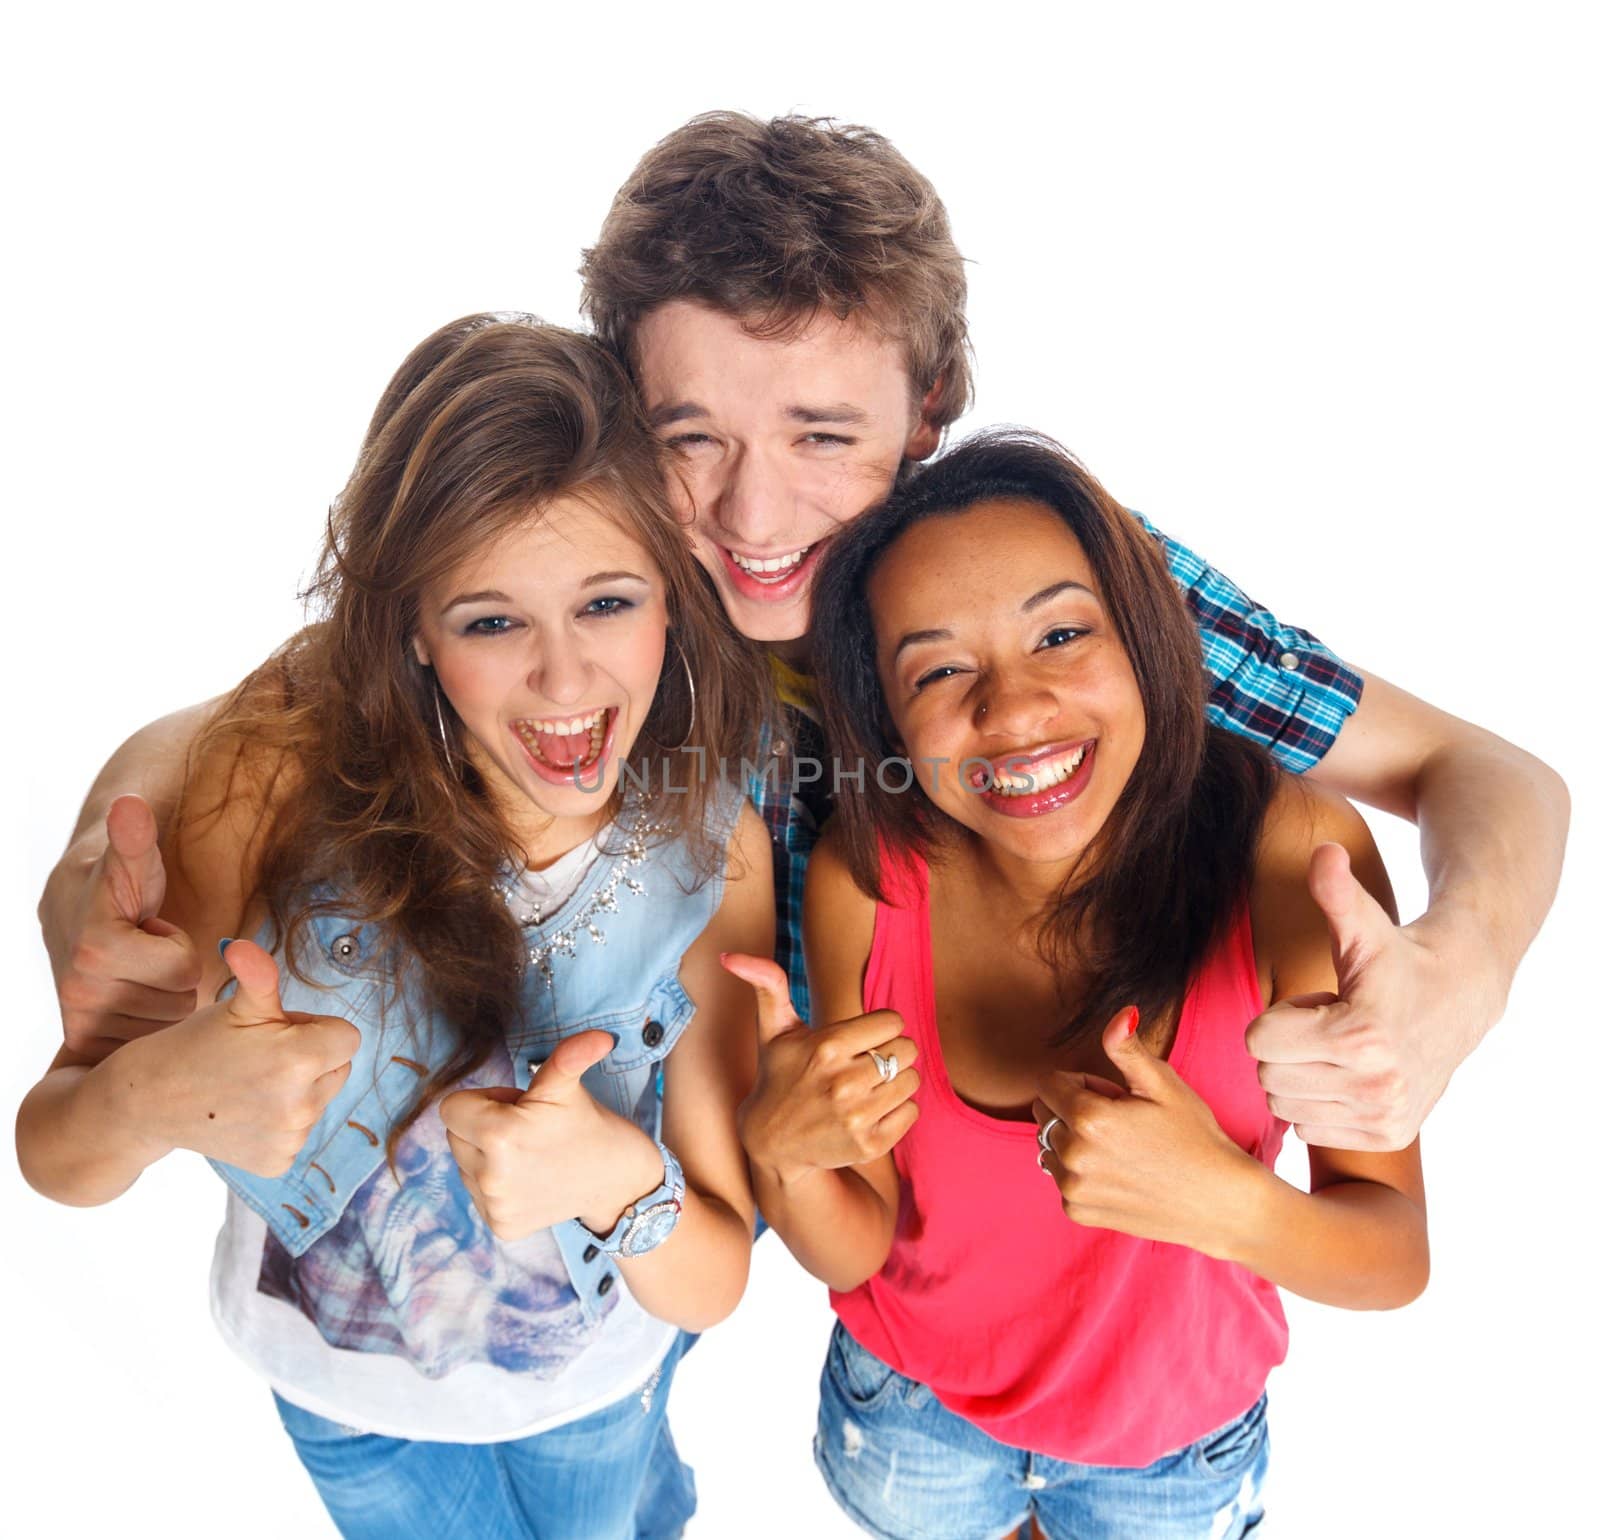 Clouse up portrait of three young teenagers laughing. Isolated on white background.